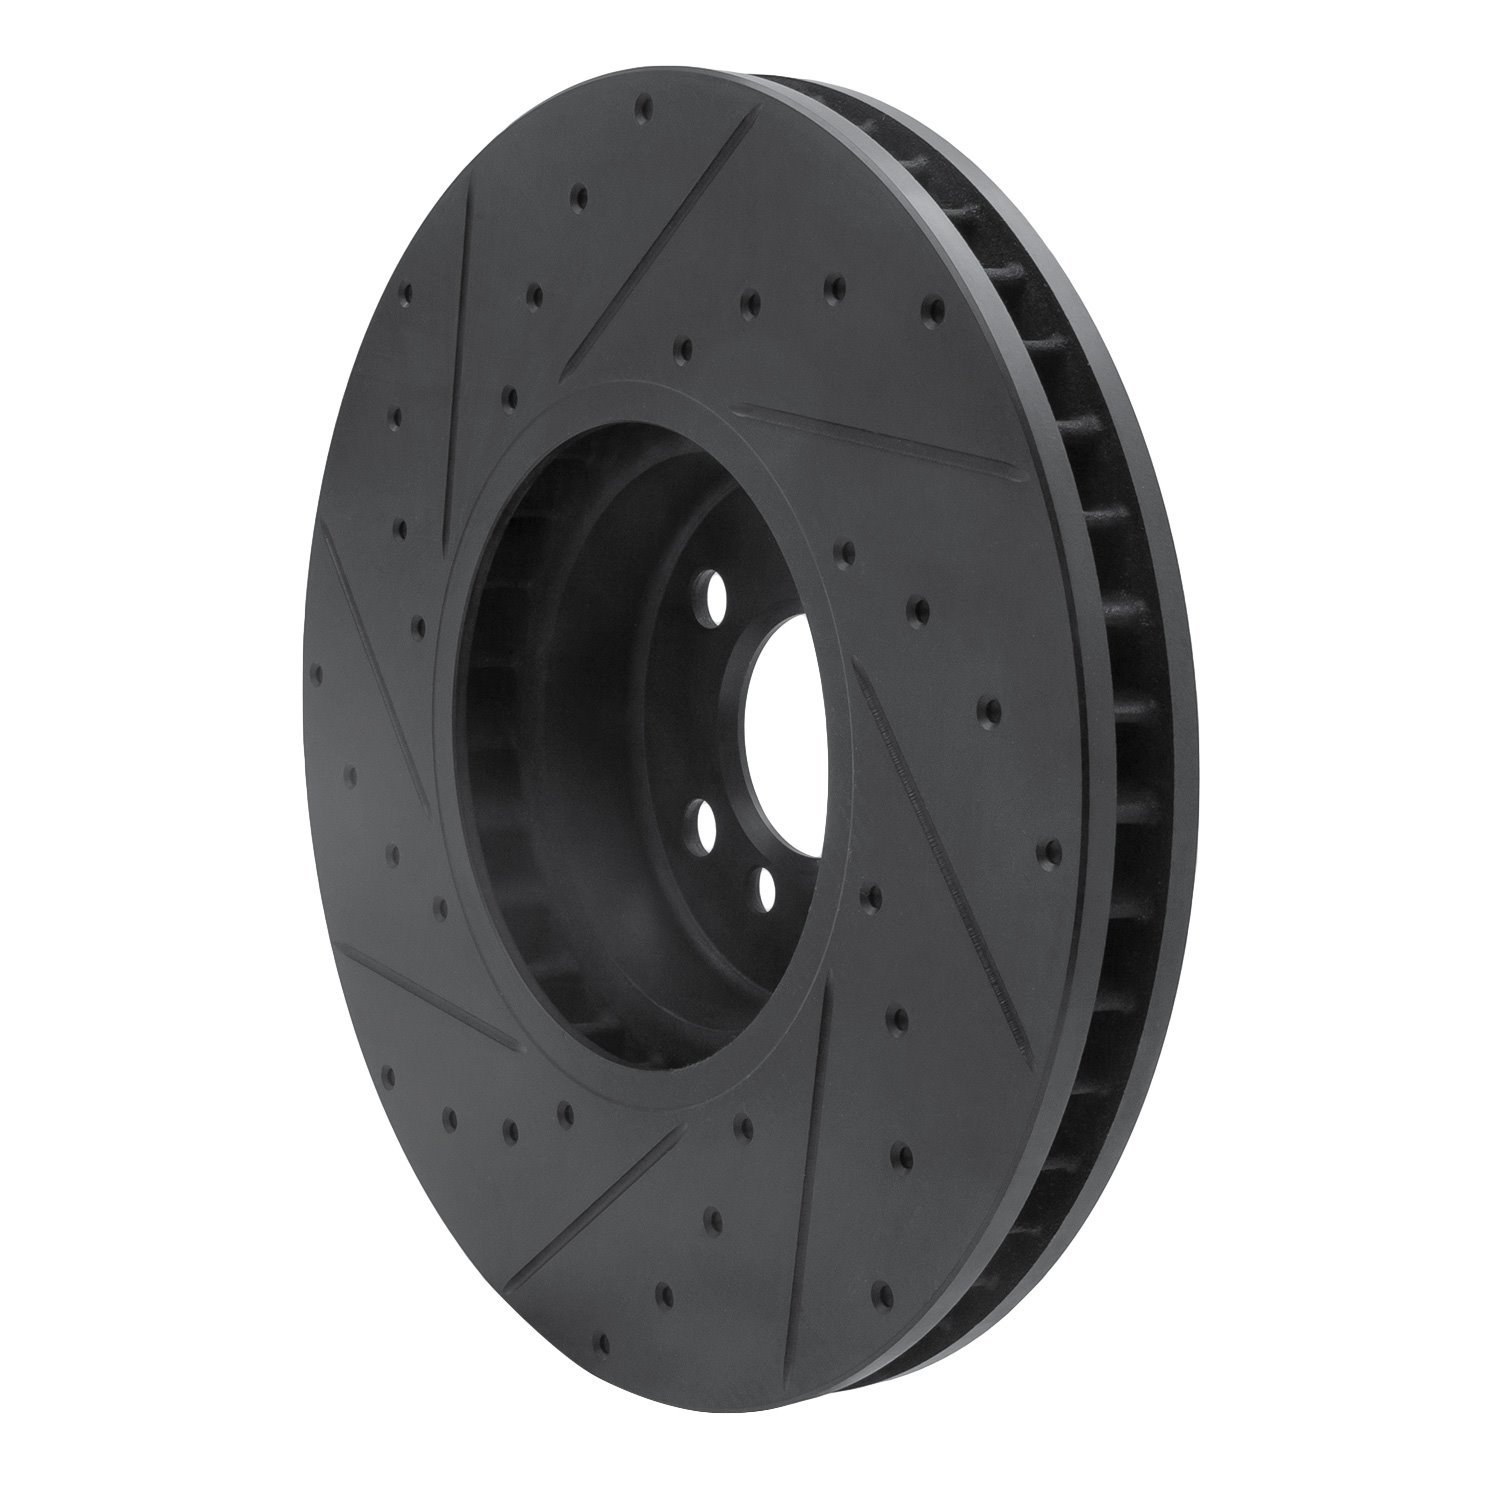 E-Line Drilled & Slotted Black Brake Rotor, Fits Select Fits Multiple Makes/Models, Position: Right Front